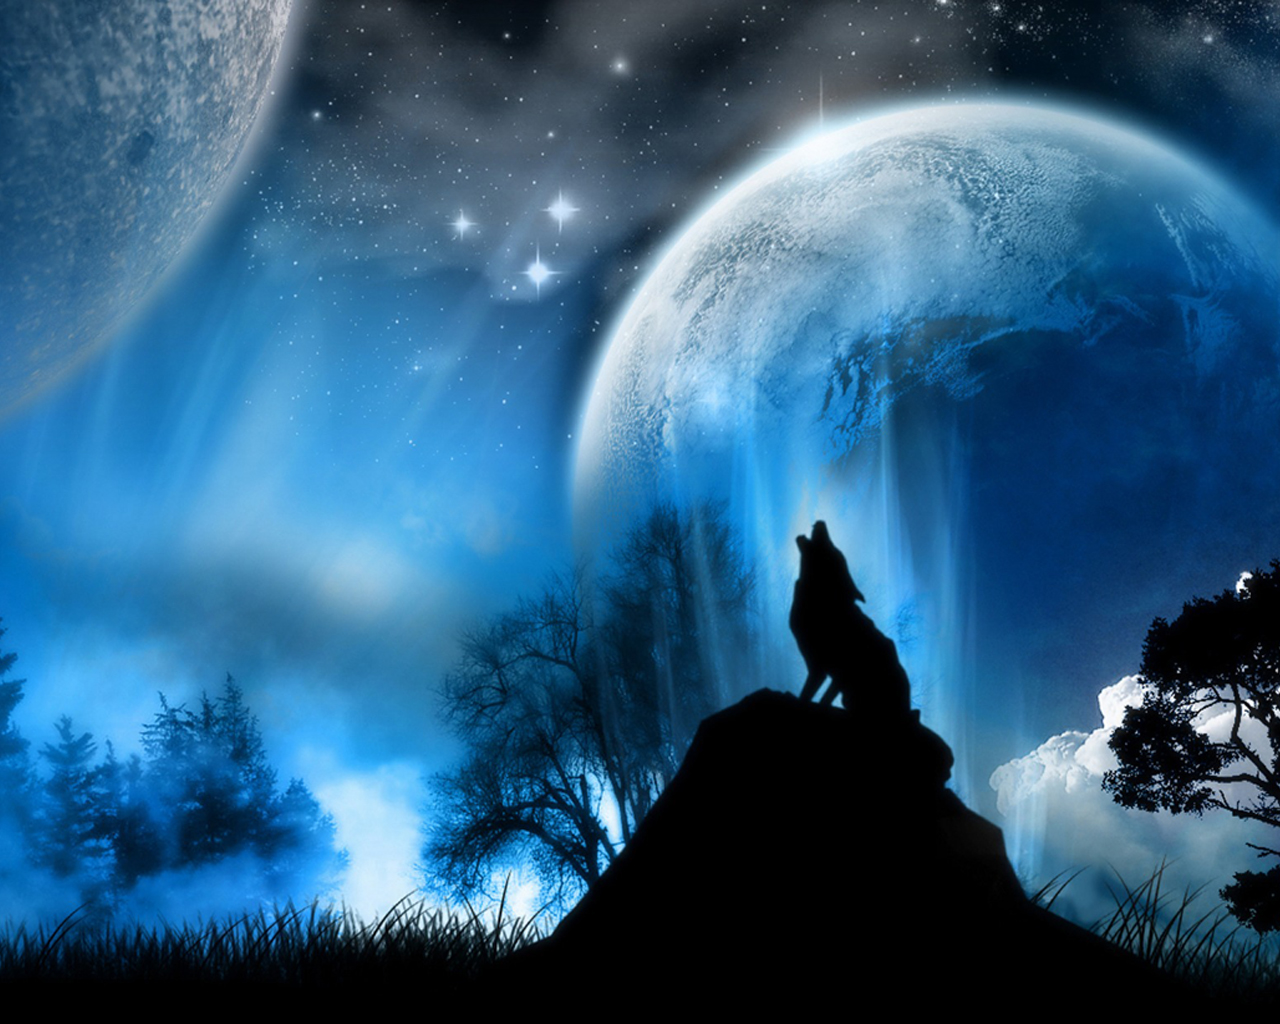  of 3D Wolf Laptop Wallpaper on this Cool Laptop Wallpapers website